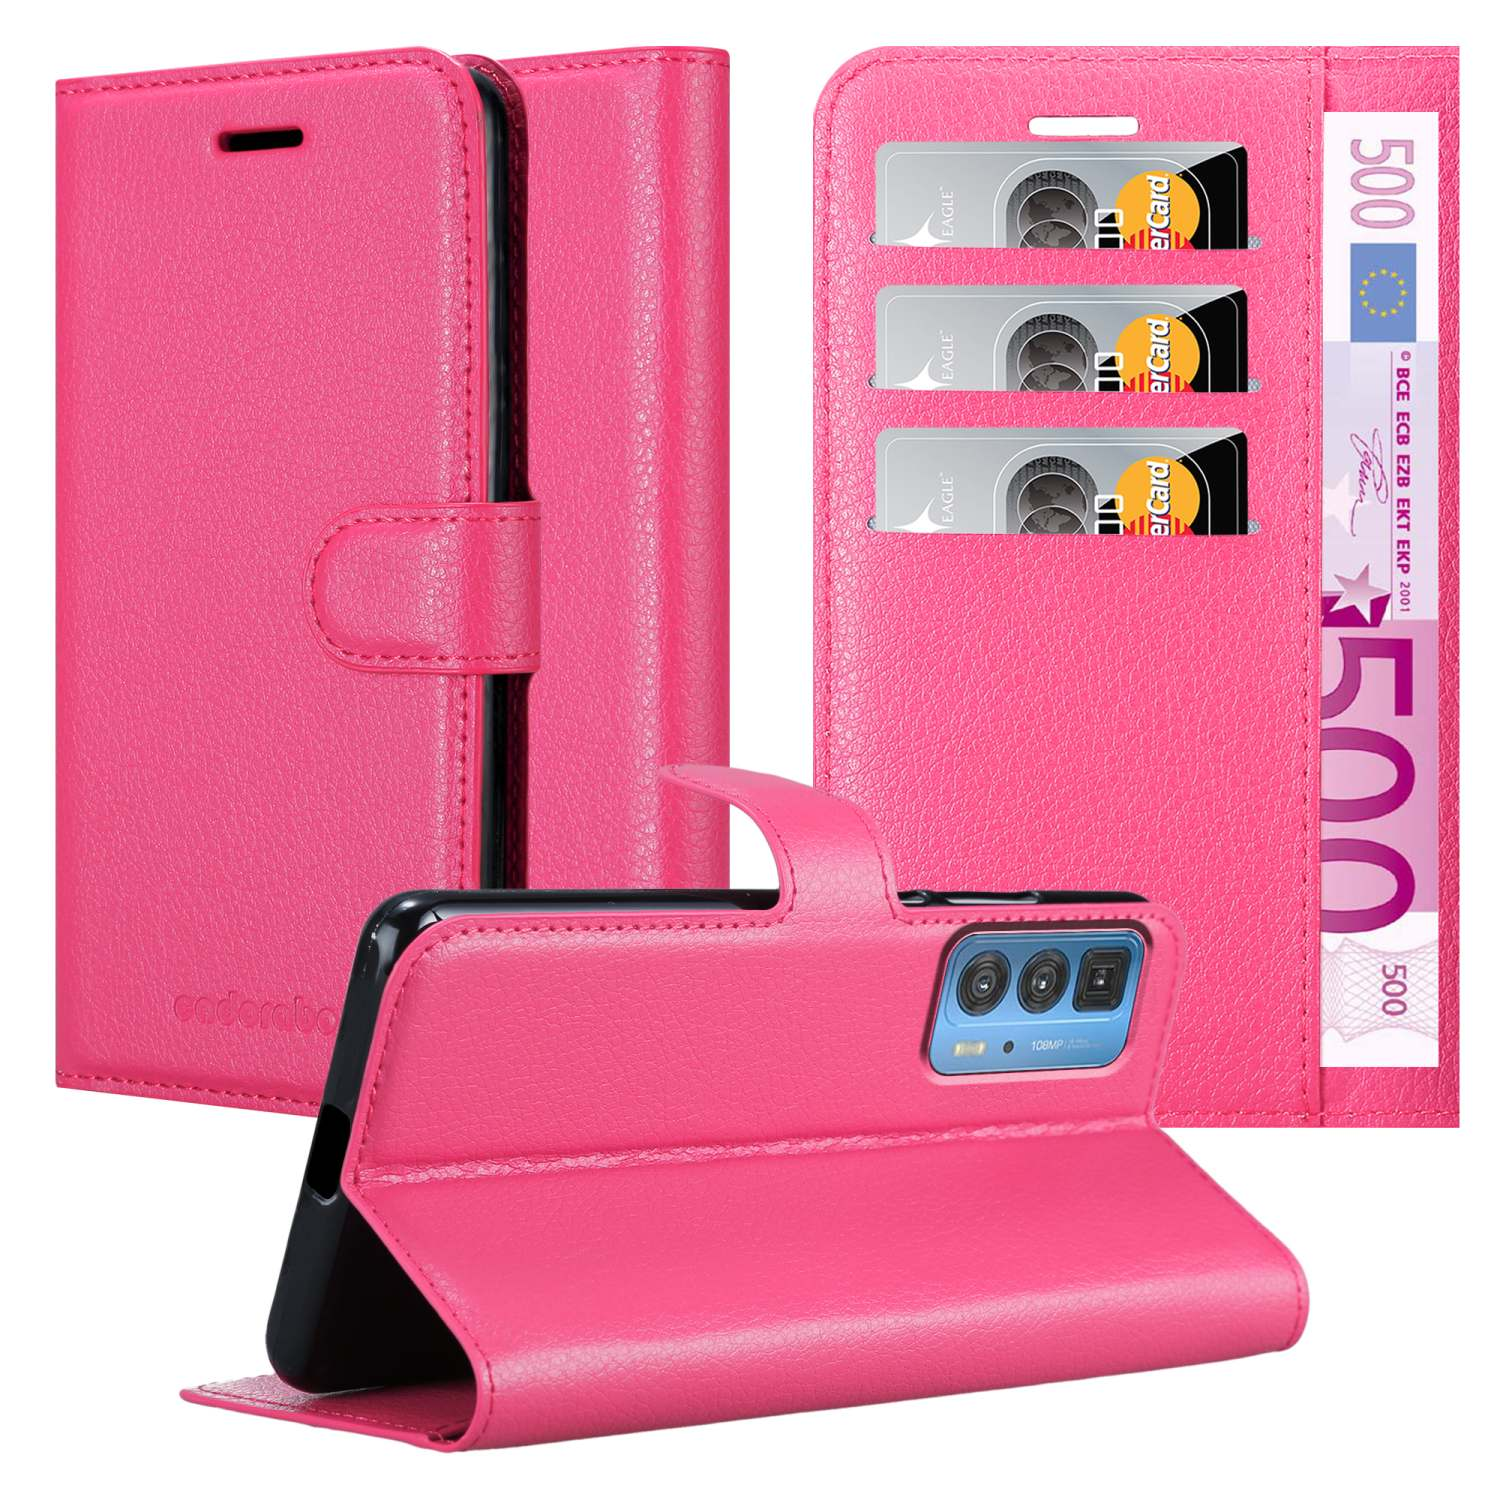 PRO Bookcover, EDGE CHERRY PINK 20 EDGE Book Hülle CADORABO Motorola, PRO, Standfunktion, S /